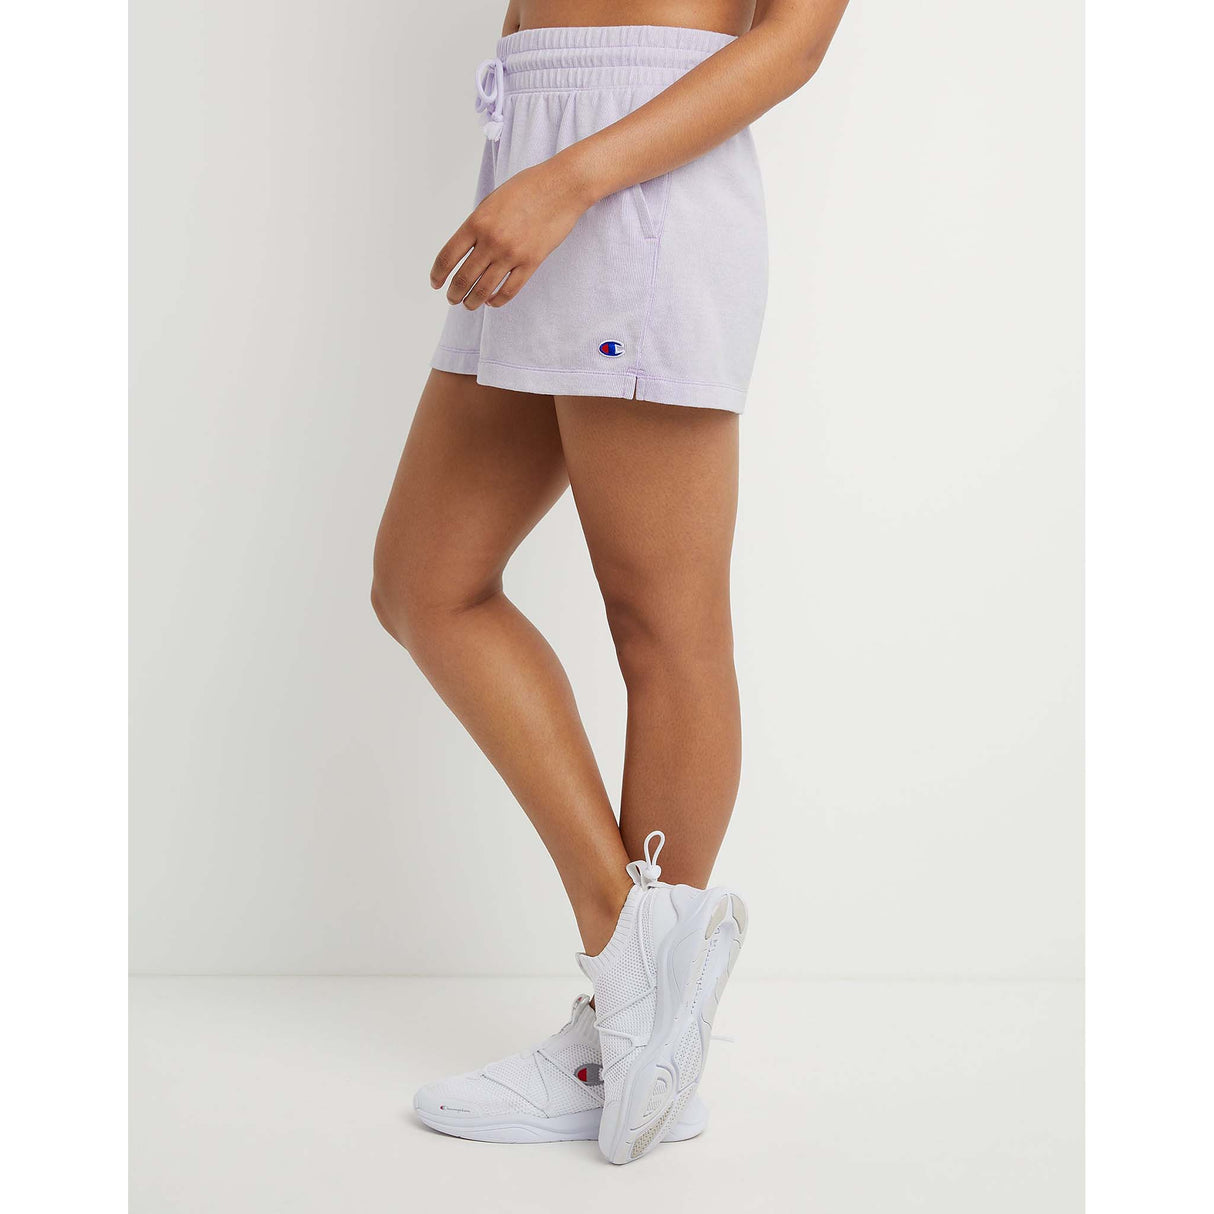 Champion Middleweight 3-inch short de sport pour femme lilas chiné lateral 2